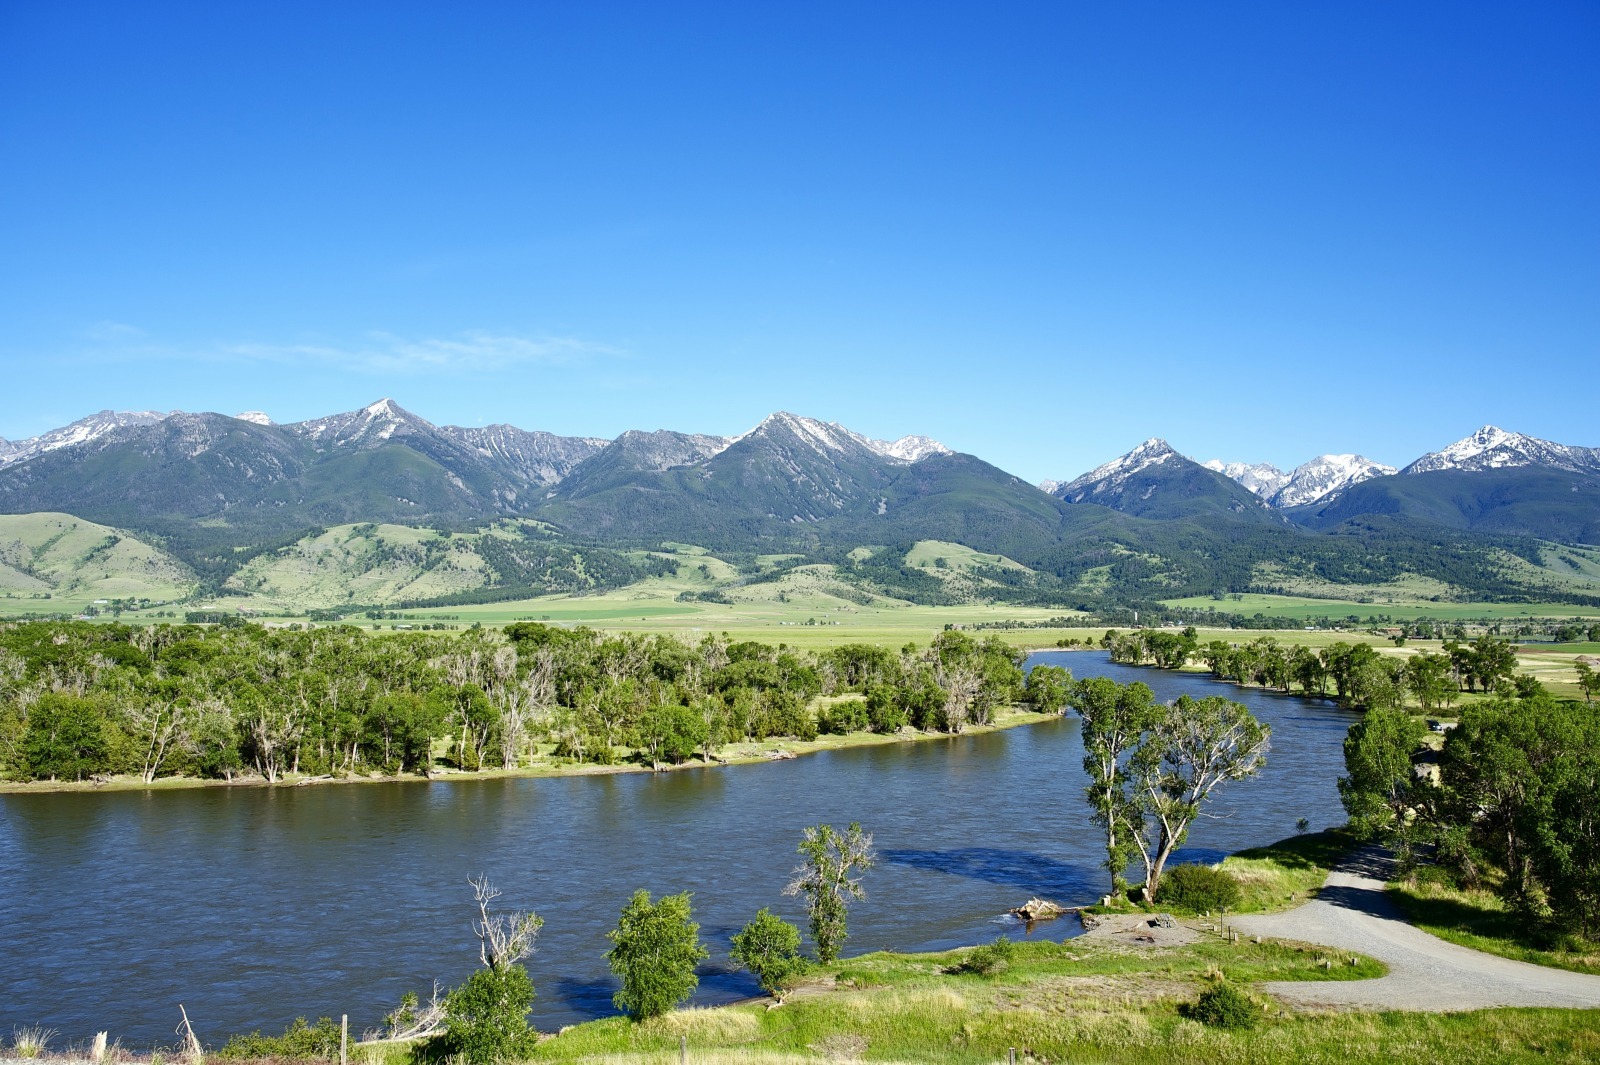 Yellowstone River and the Mountains